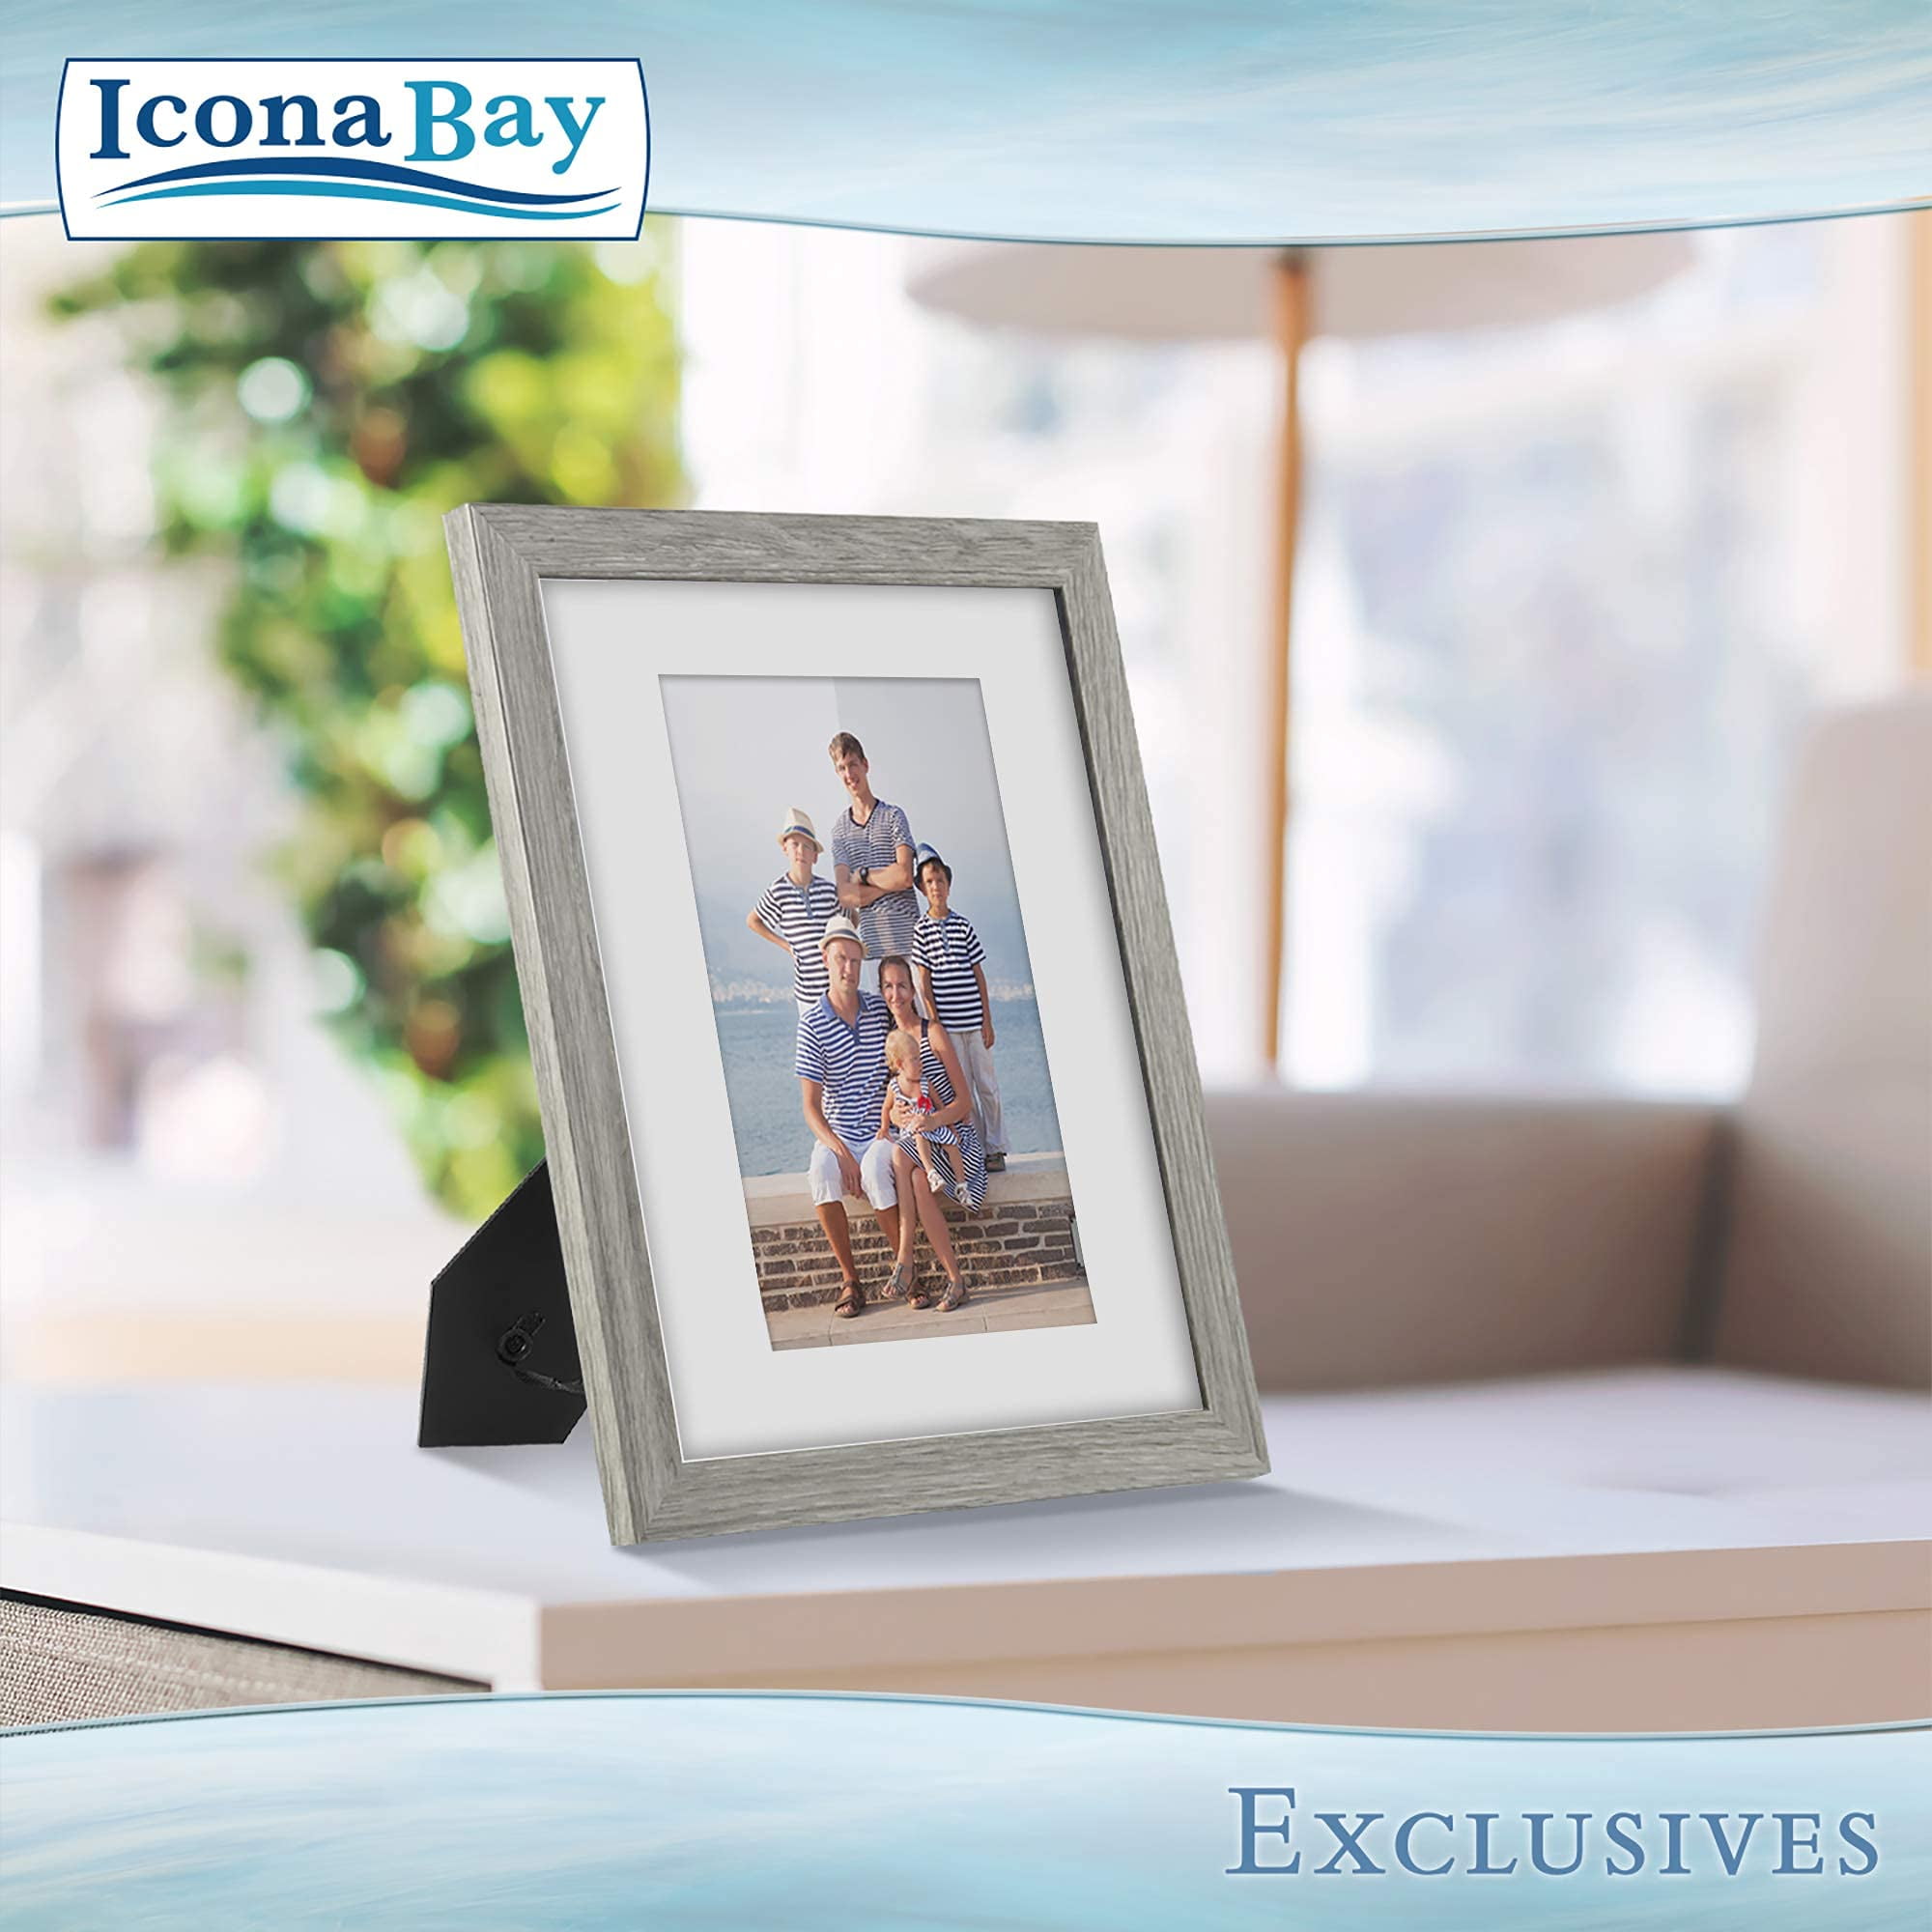 Icona Bay 8x10 White Solid One-Piece Picture Frames W/ Mat for 5x7, 5 Pack,  Sunrise Tabletop or Wall Mounted Frames 